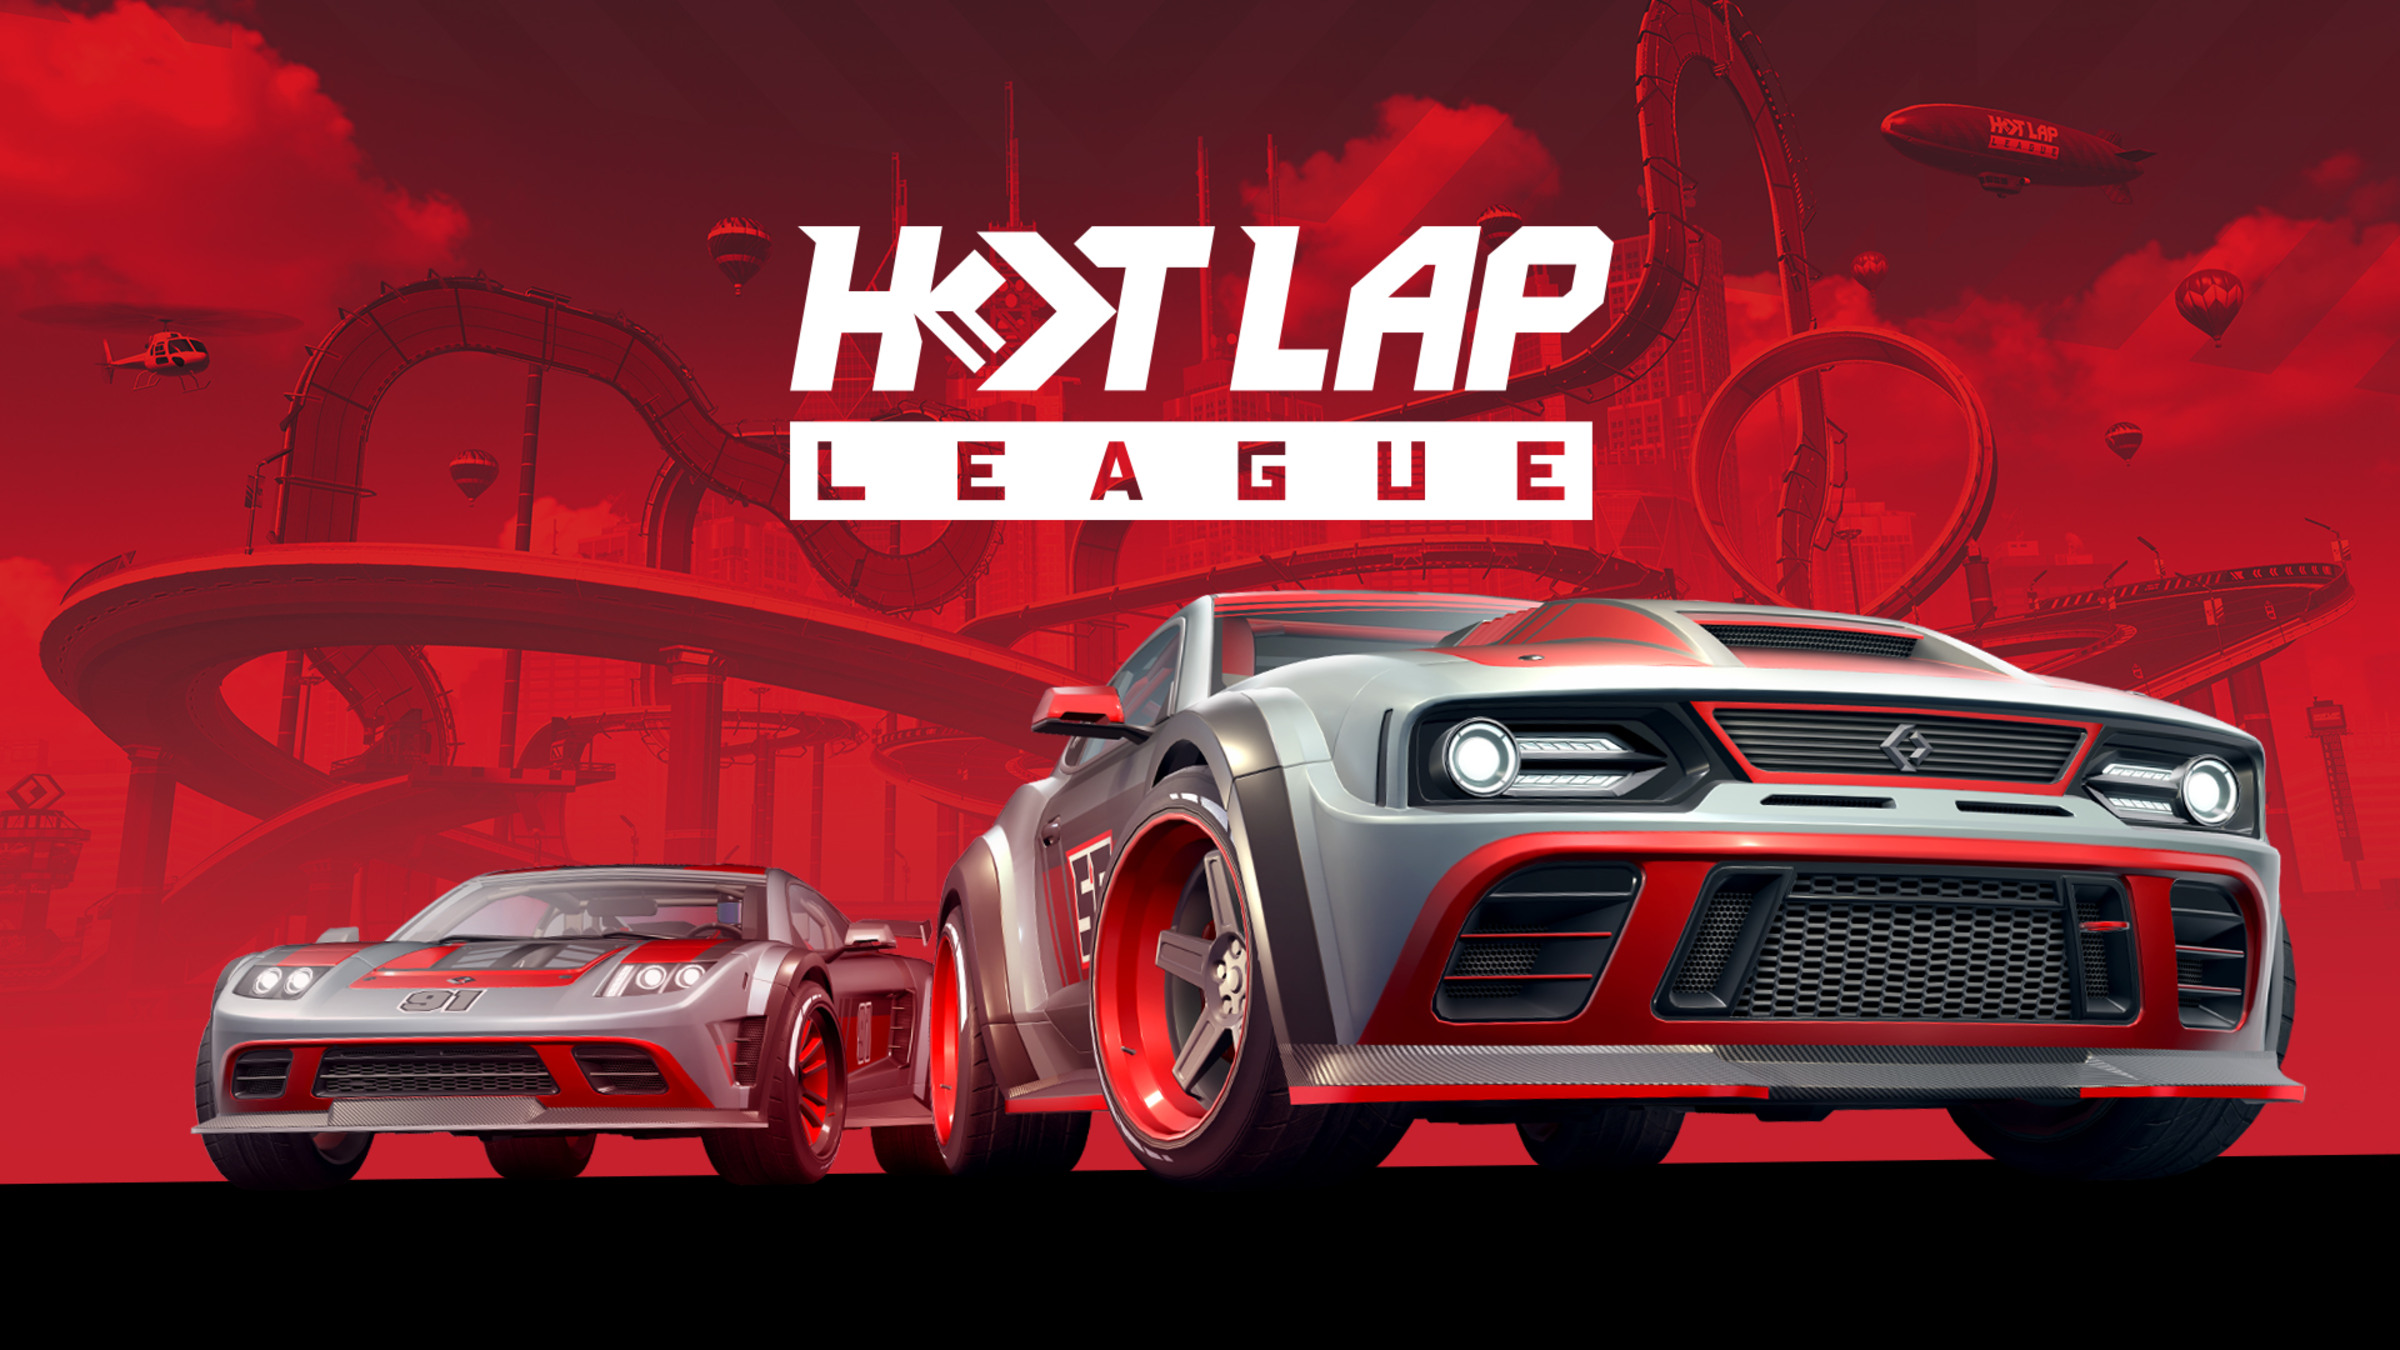 Hot Lap League: Deluxe Edition For Nintendo Switch - Nintendo Official Site